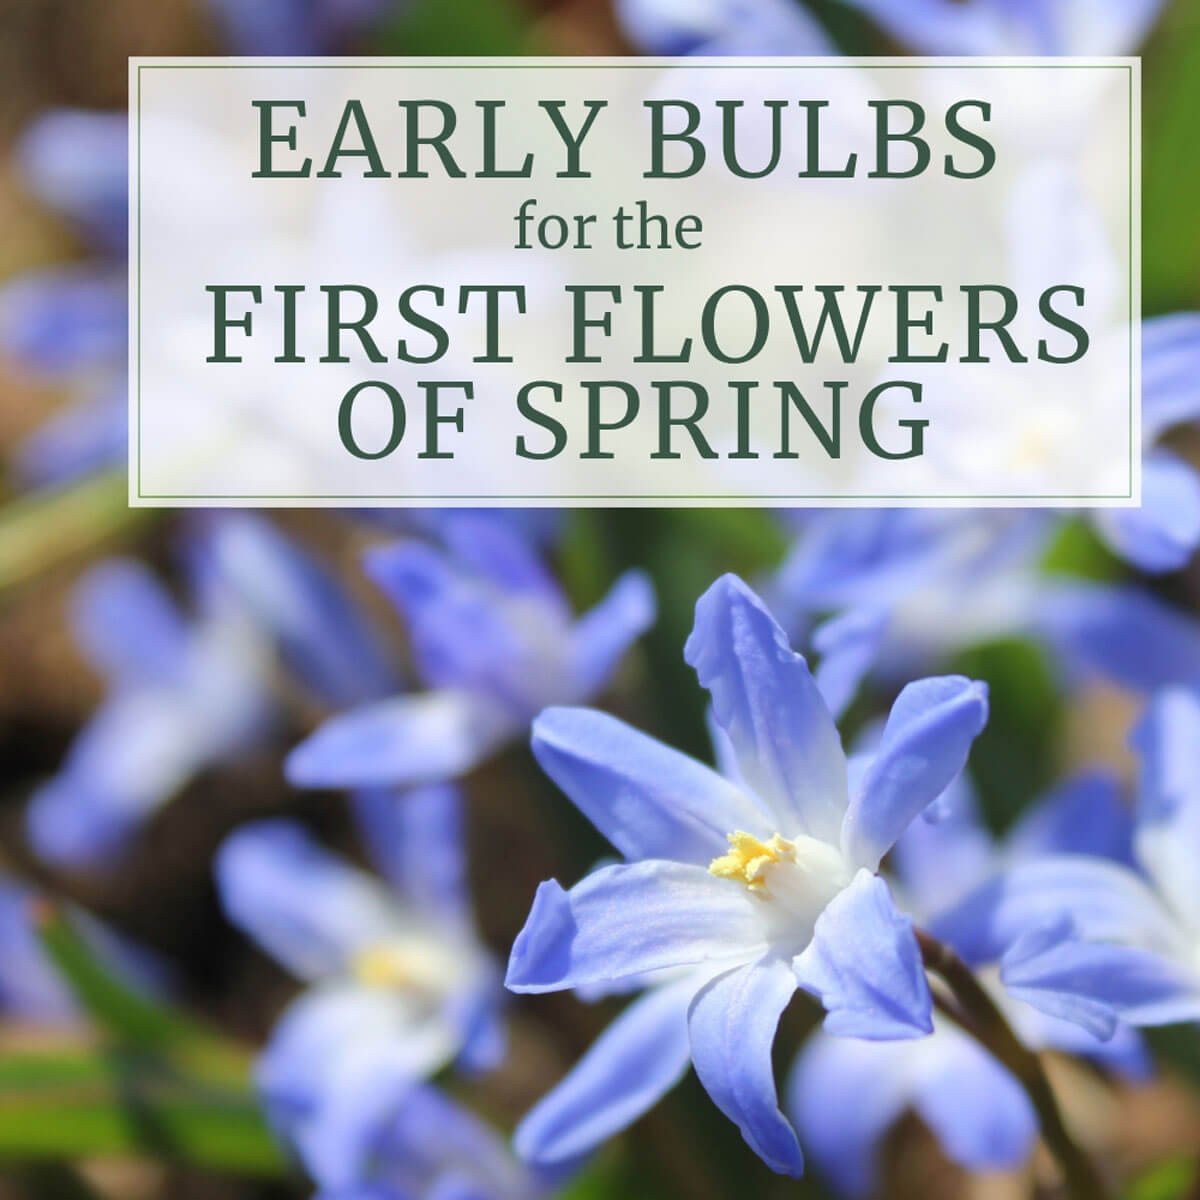 https://dropinblog.net/34250657/files/featured/Early-Bulbs-for-the-First-Flowers-of-Spring.jpg